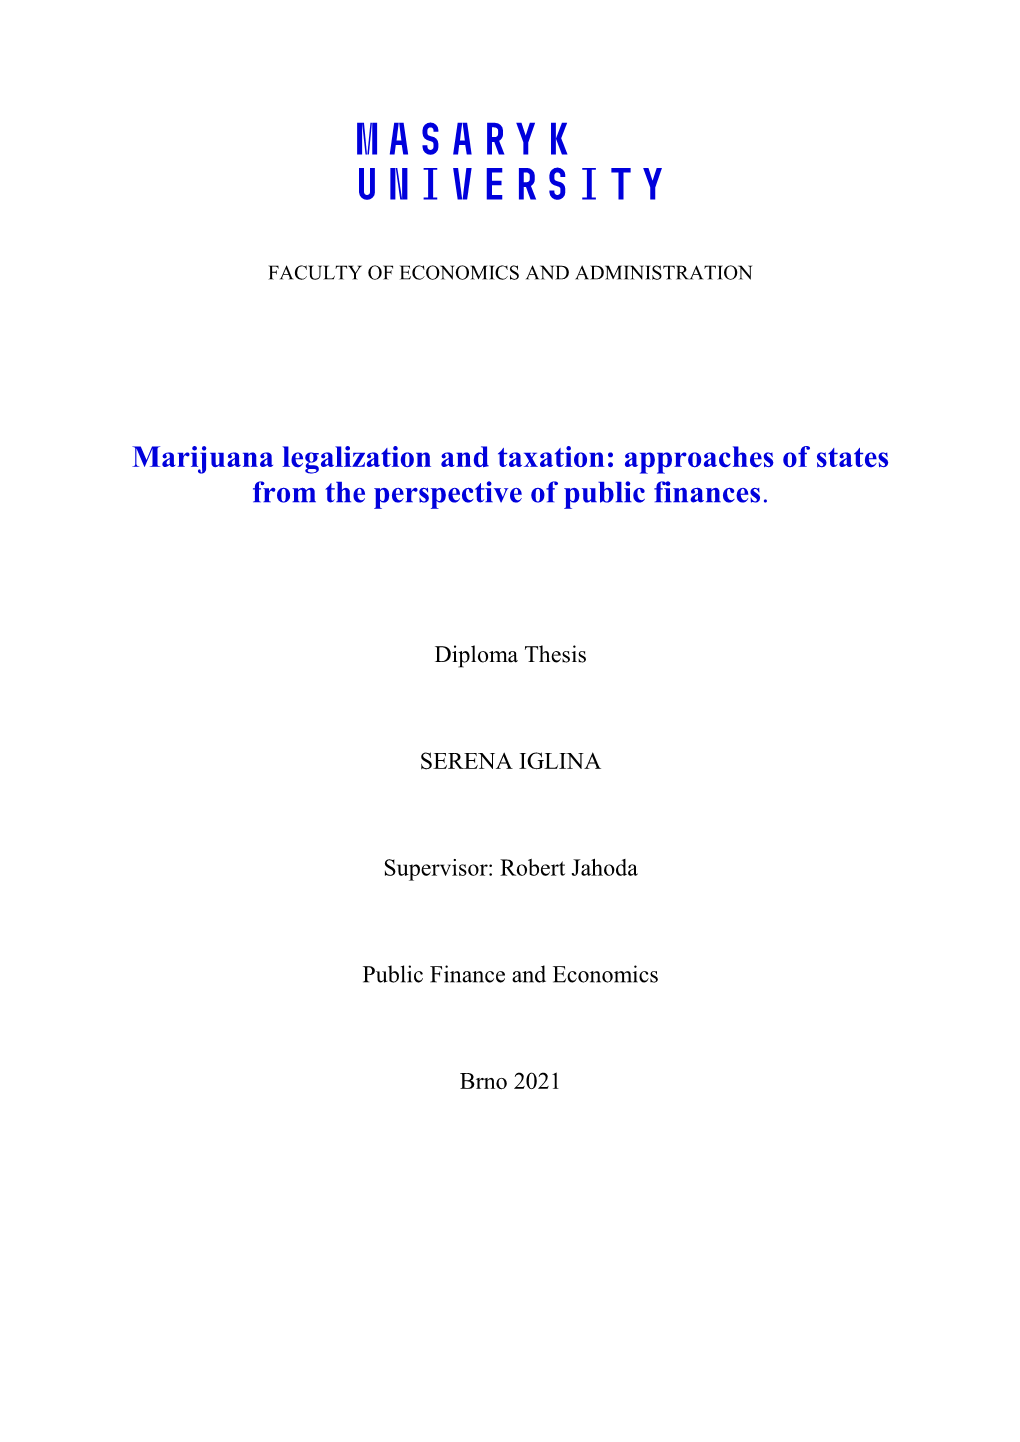 Marijuana Legalization and Taxation: Approaches of States from the Perspective of Public Finances